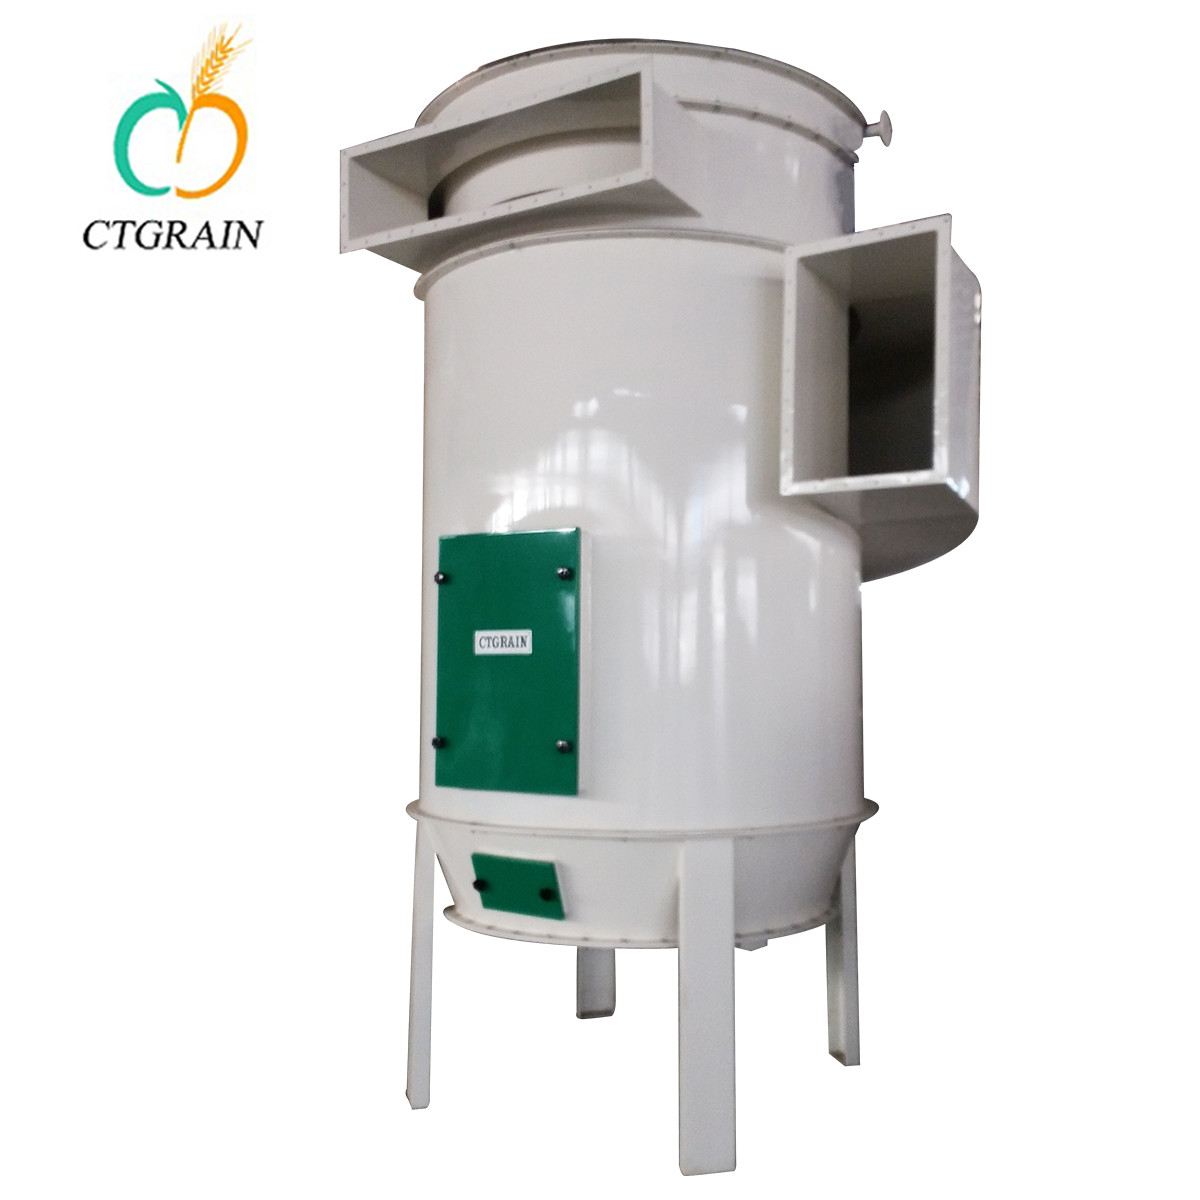 Cheap Carbon Steel Grain Cleaning Machine Jet Dust Collector Filter TBLM 104 - 20 wholesale